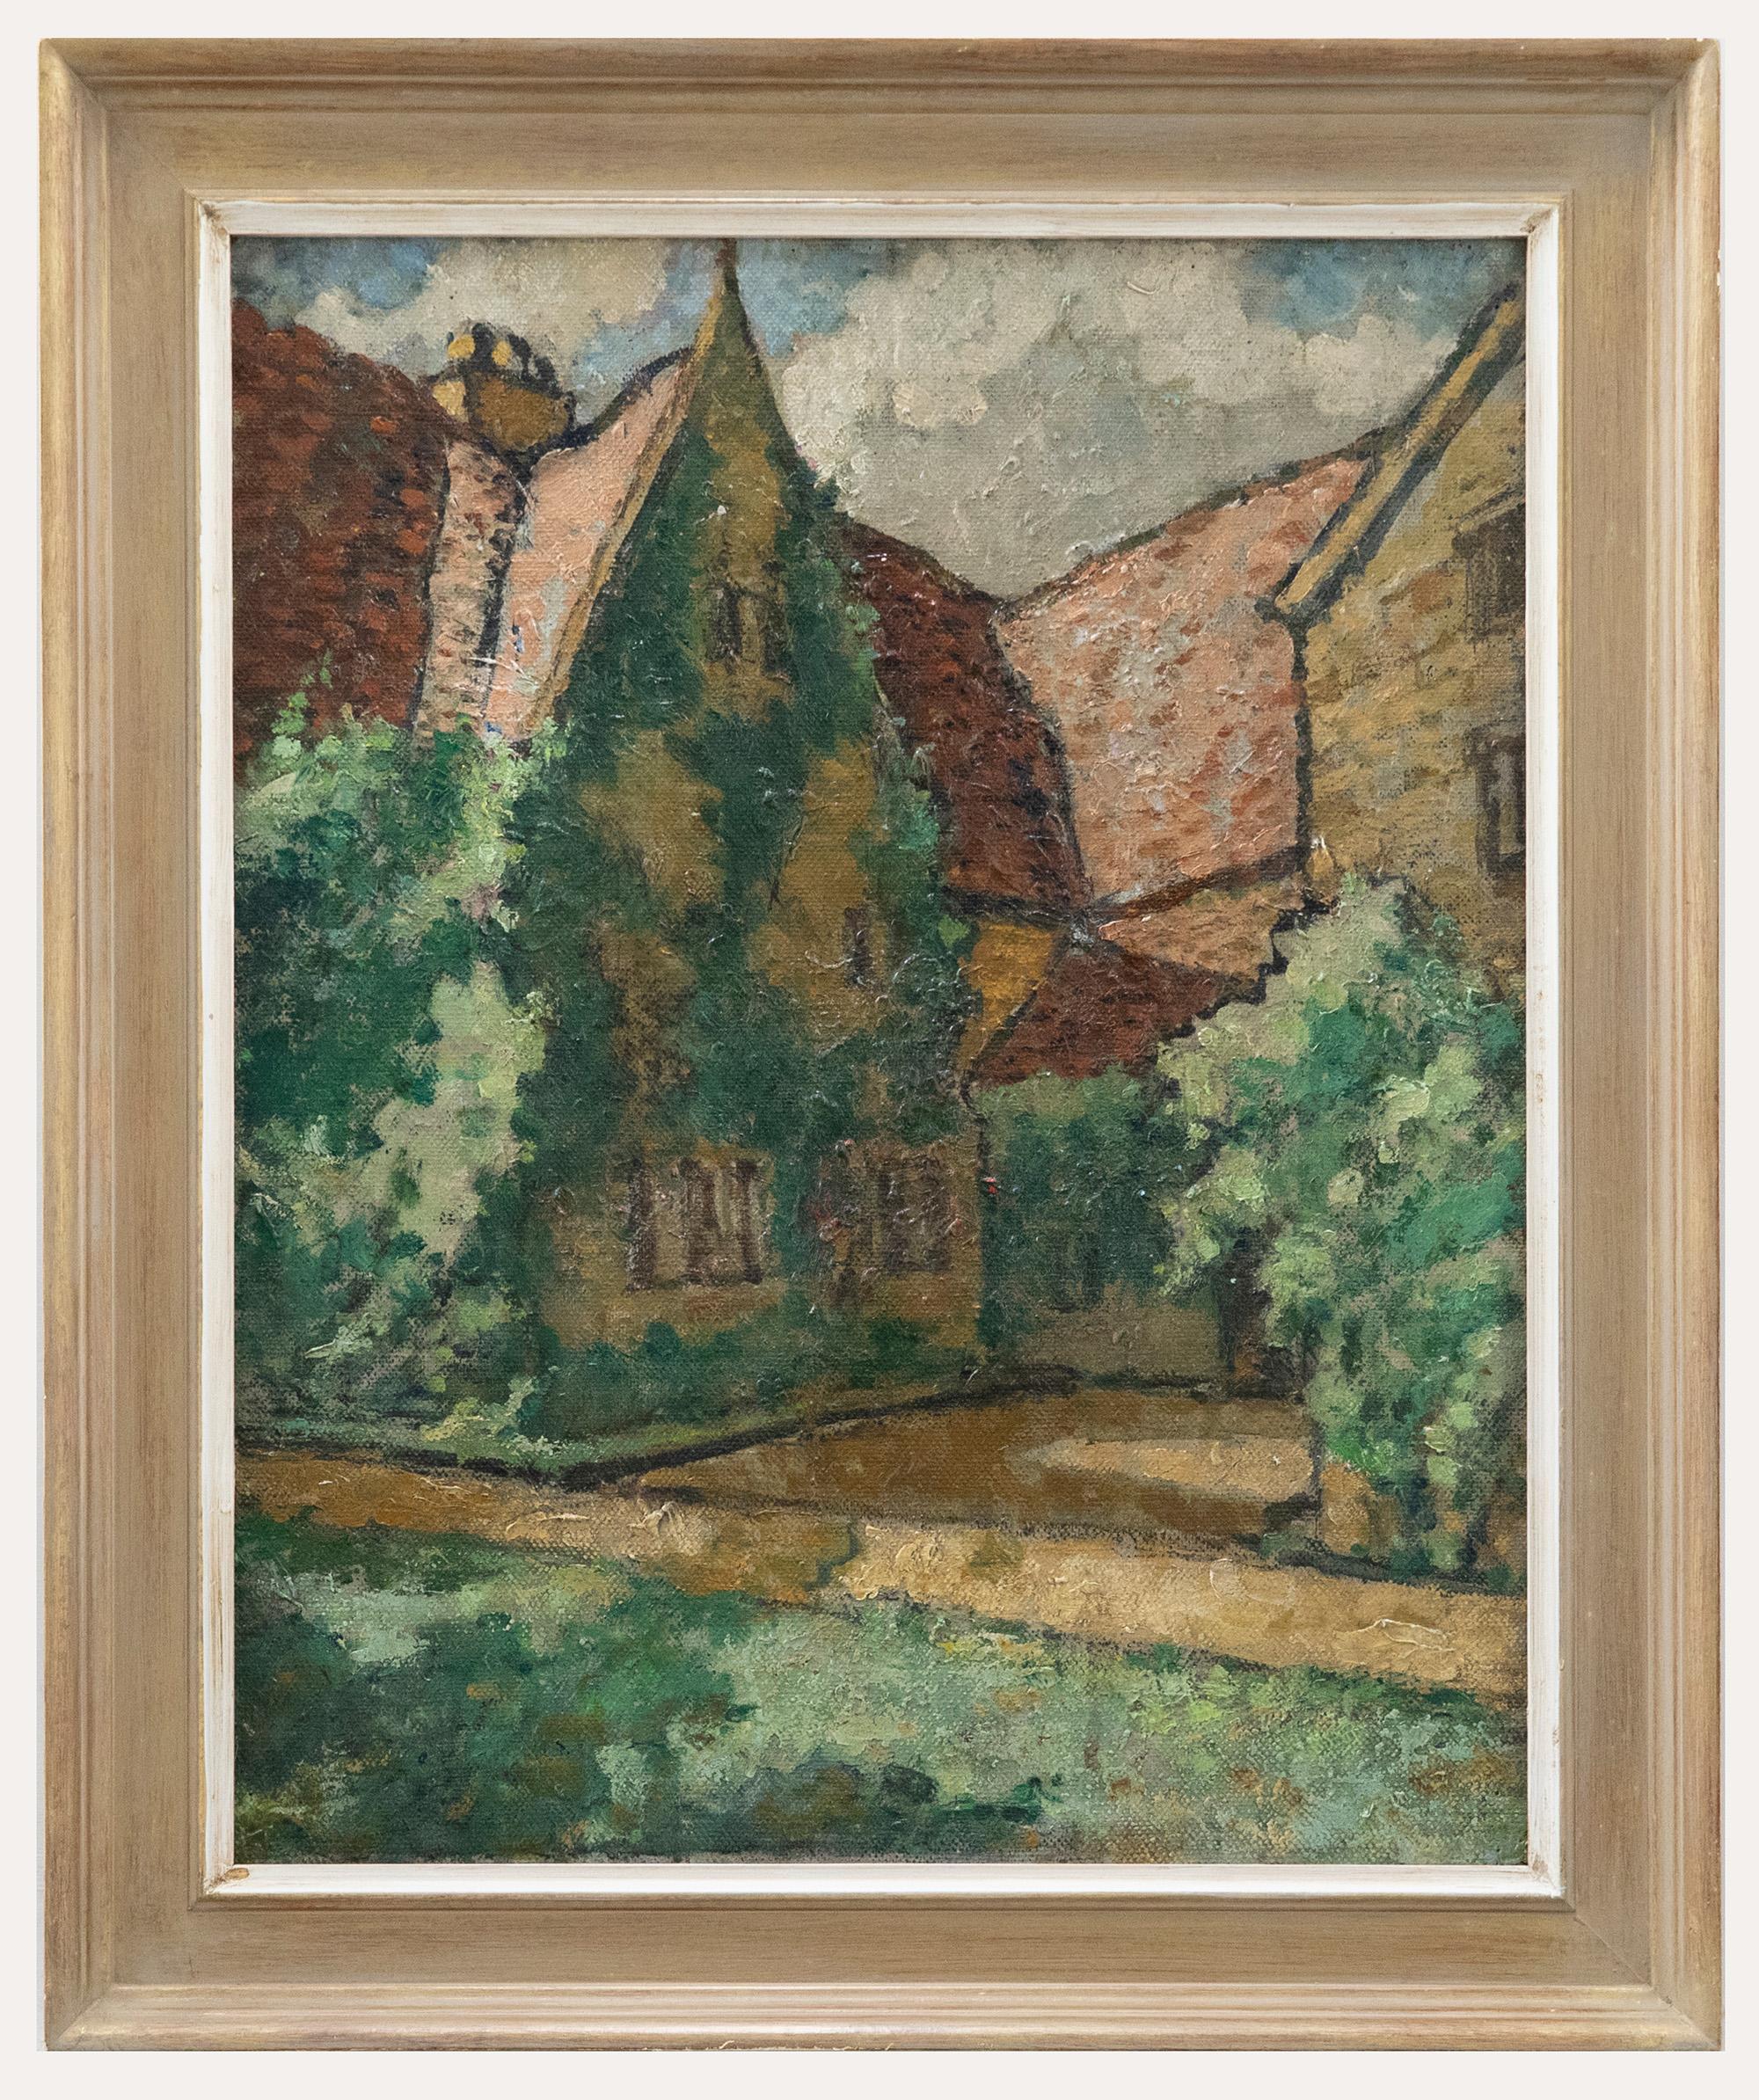 A charming depiction of the entrance to a country house that is partially covered in ivy. Signed verso. Presented in a wooden frame with a white painted window. On board. 